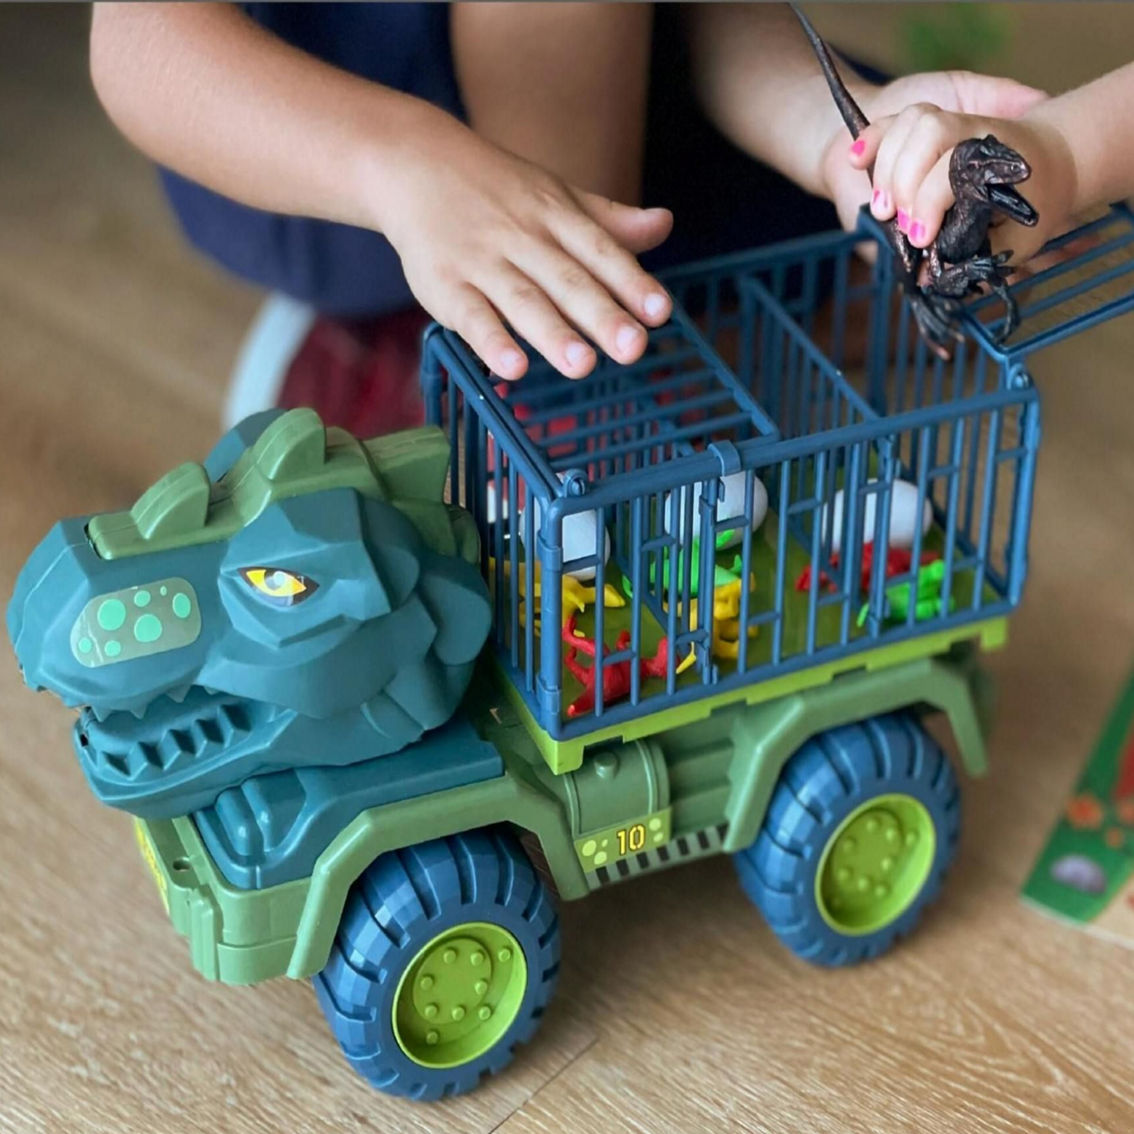 The Bubble Factory Dino Truck 16 pc. Play Set - Image 6 of 9